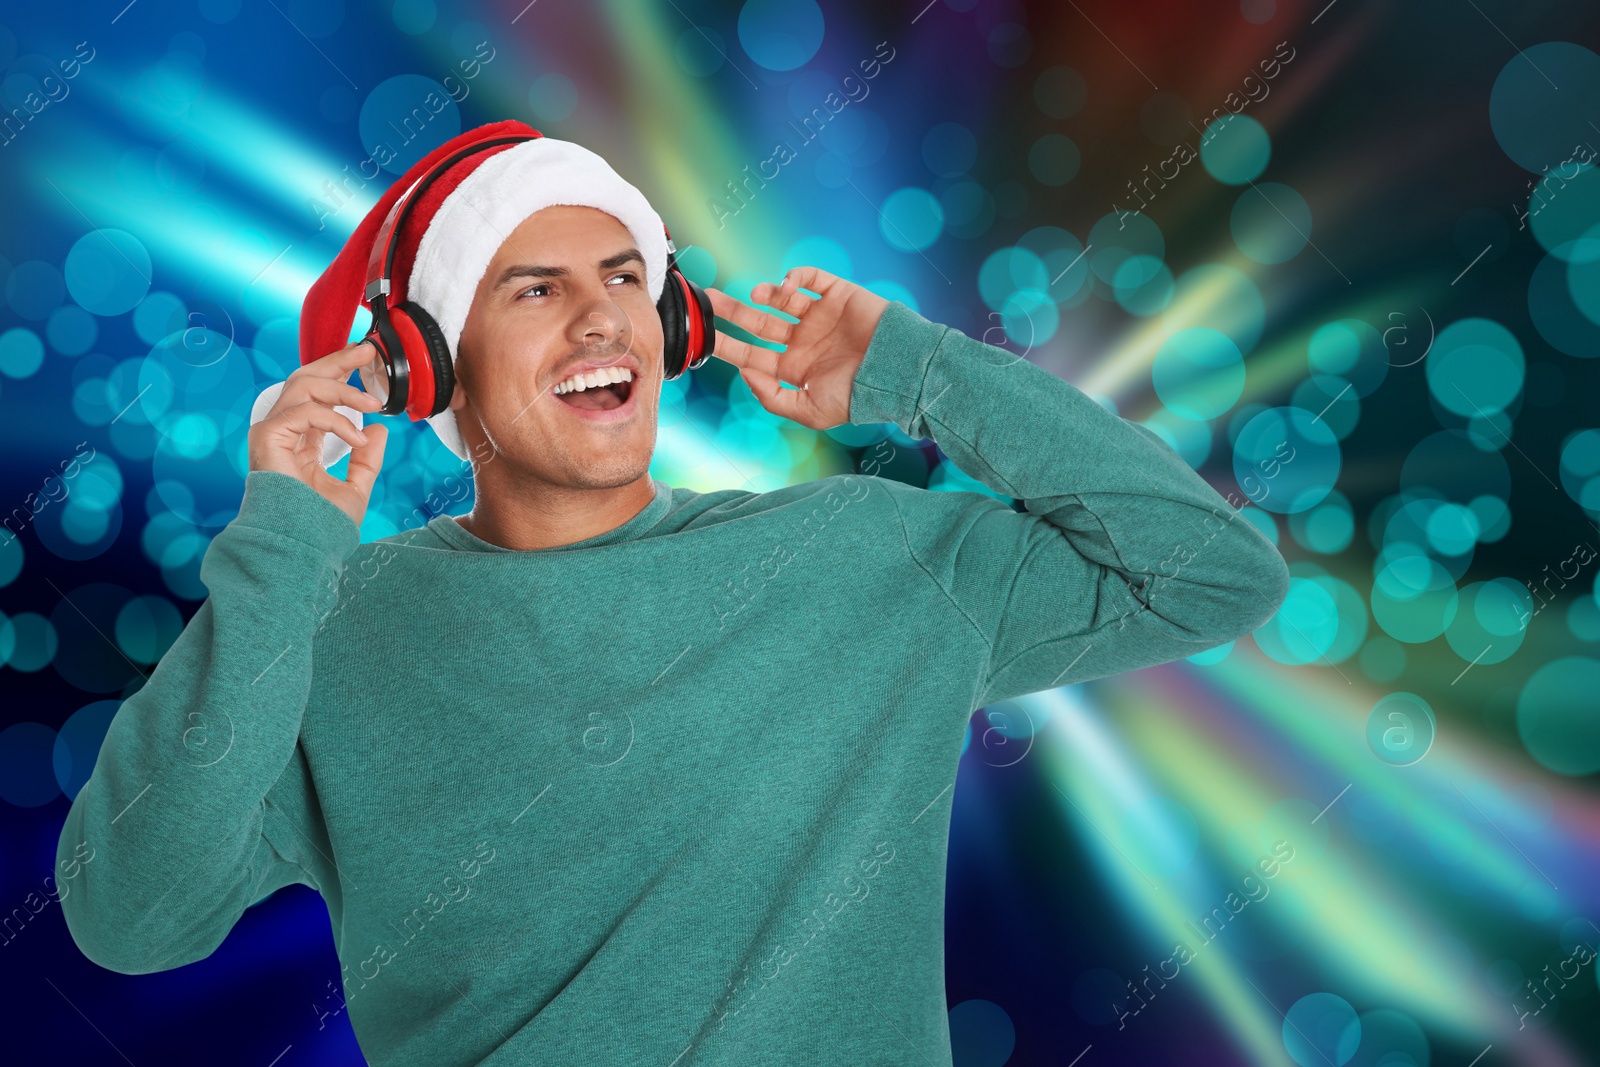 Image of Happy man in Santa hat listening to Christmas music with headphones on bright background, bokeh effect